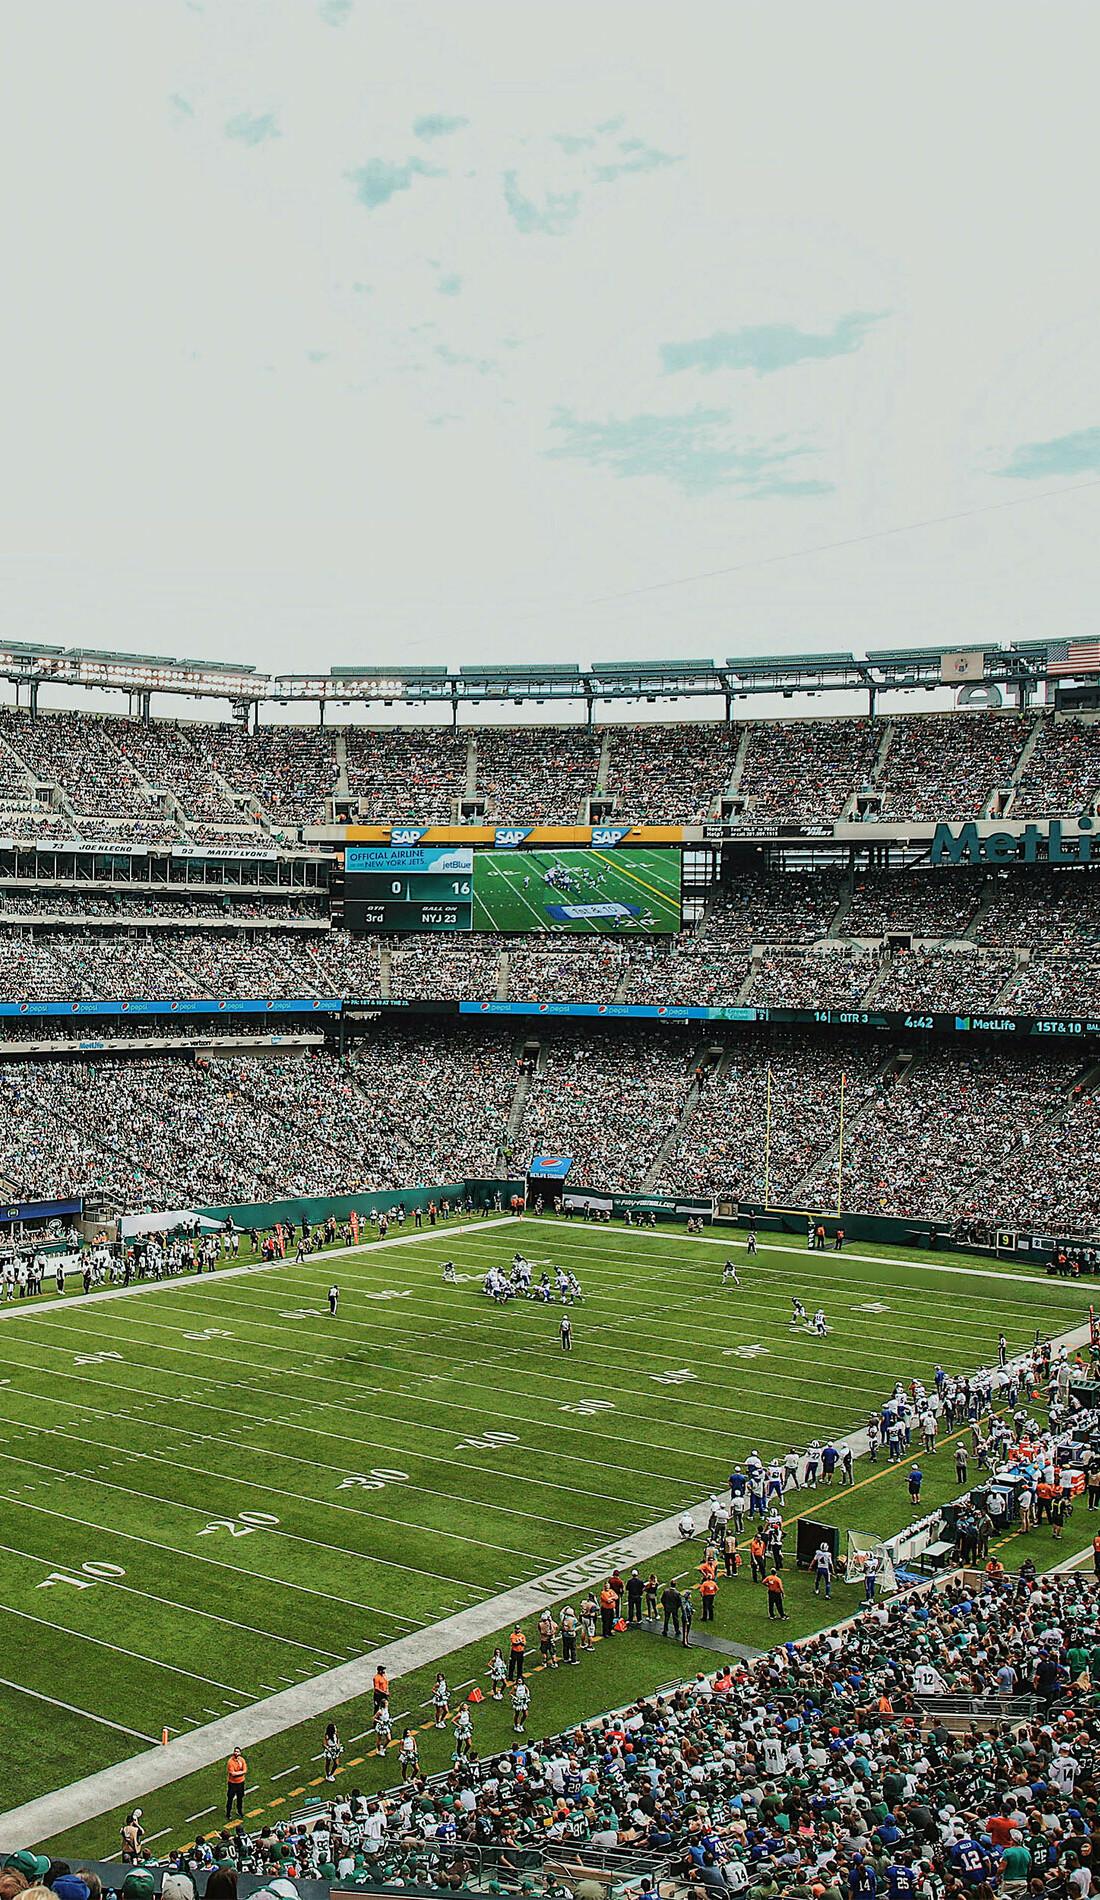 MetLife, New York Jets and New York Giants team up for online